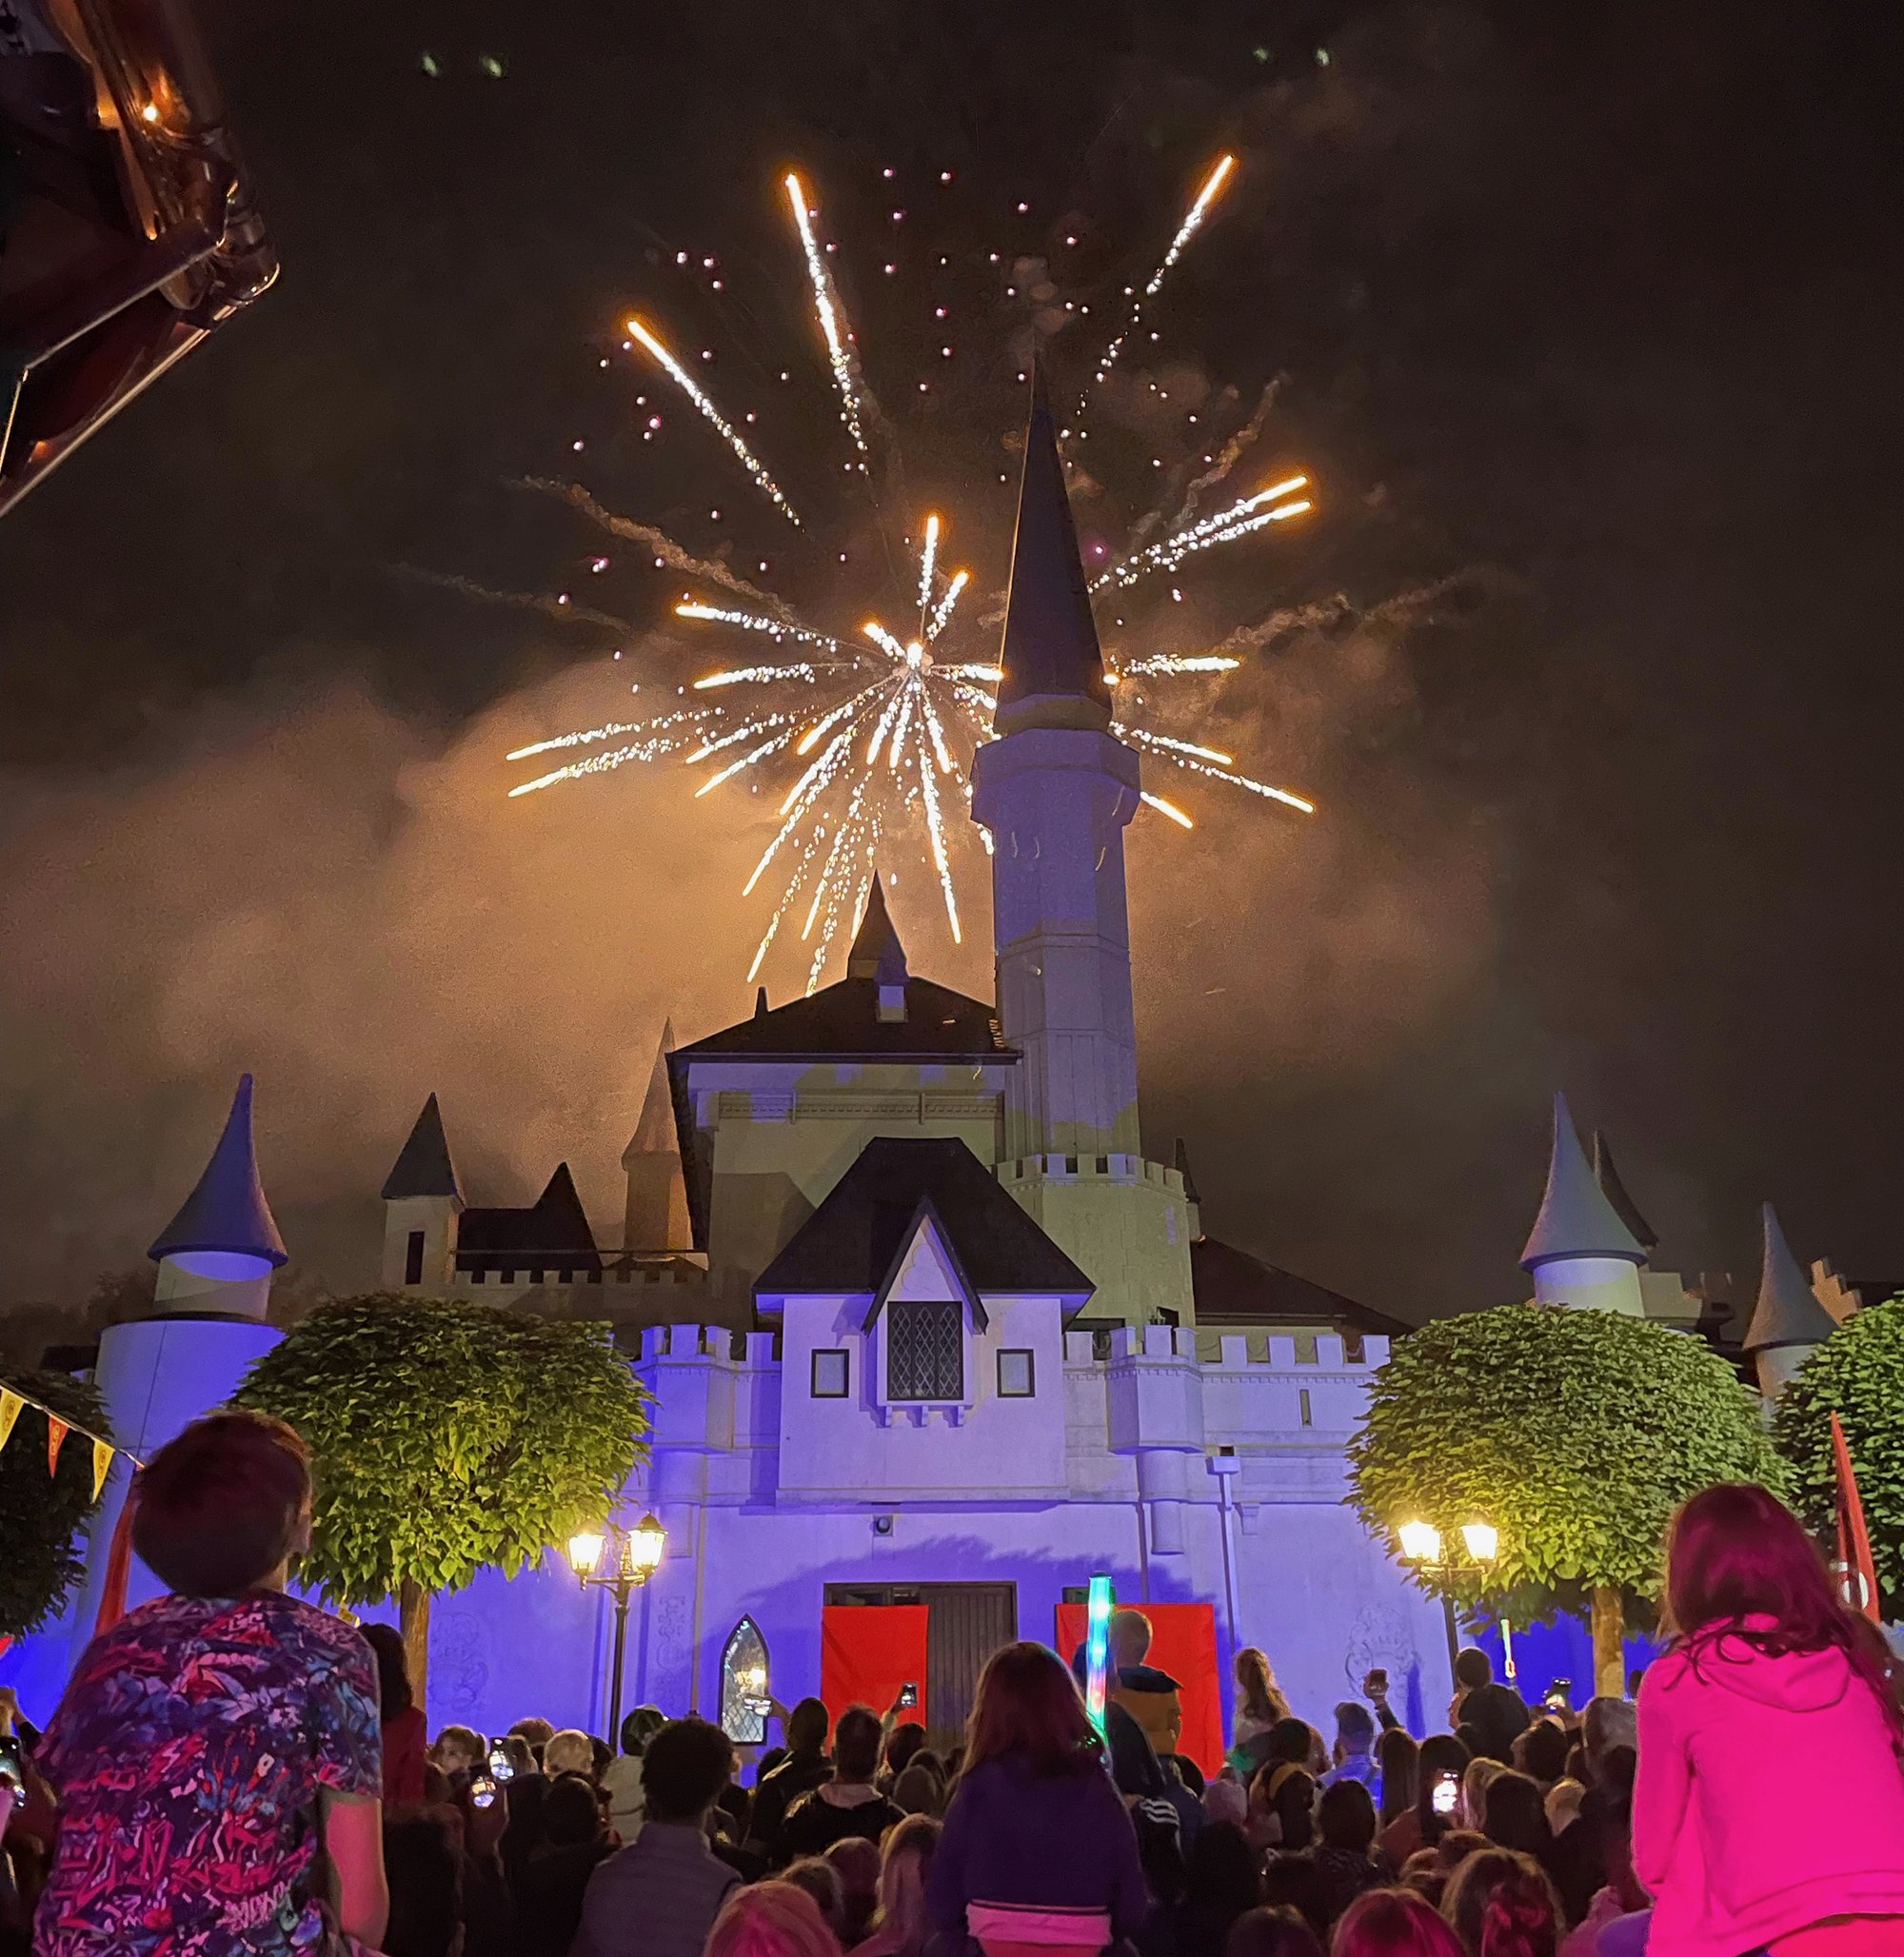 Ring in New Year in style at Gulliver’s Land